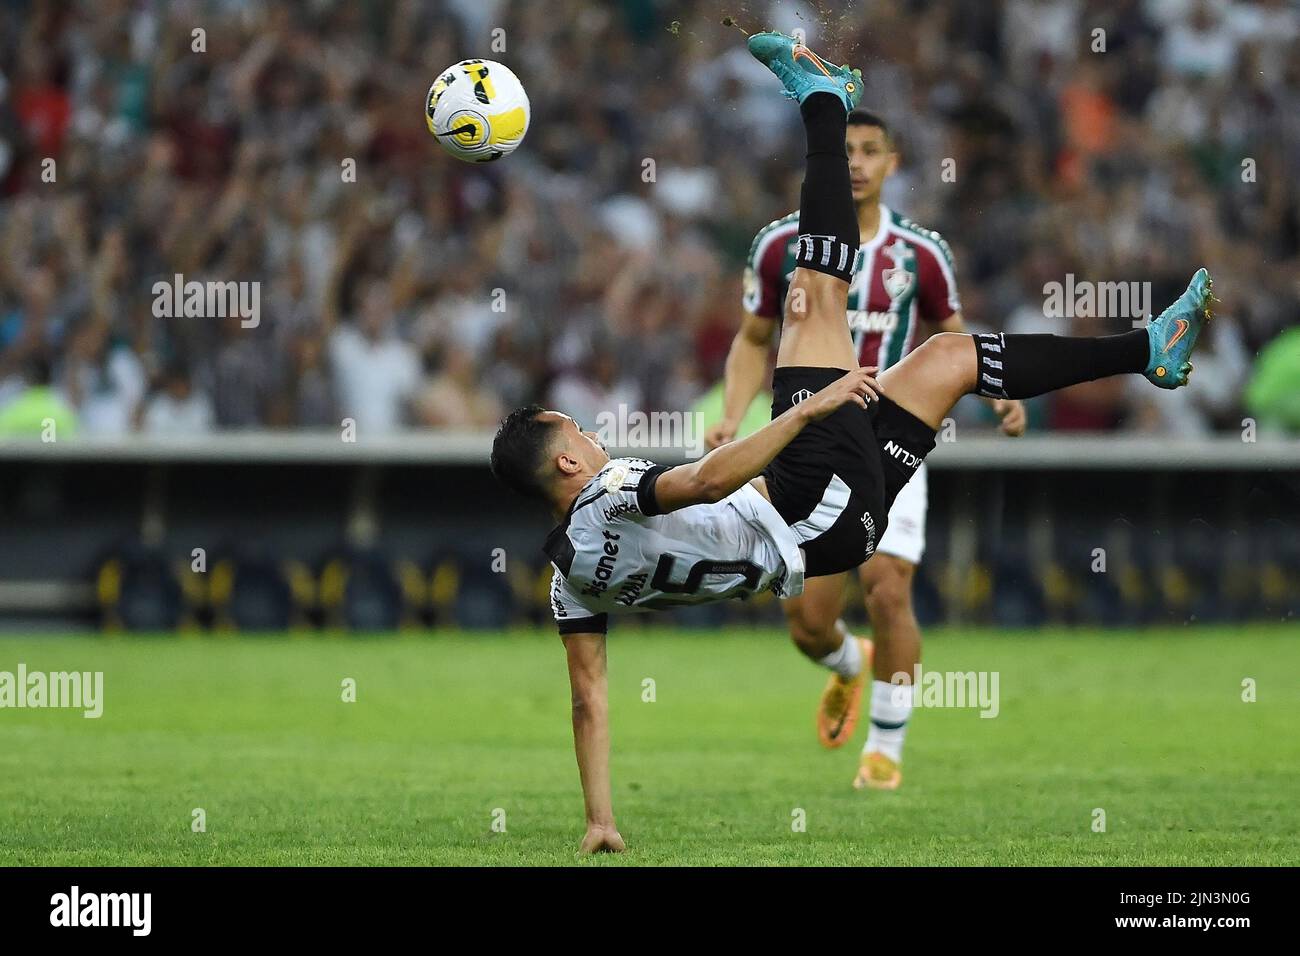 Rio de Janeiro, Brazil,July 9, 2022. Football player Lima of the team of Ceará, during the game Fluminense x Ceará for the Brazilian Championship in t Stock Photo